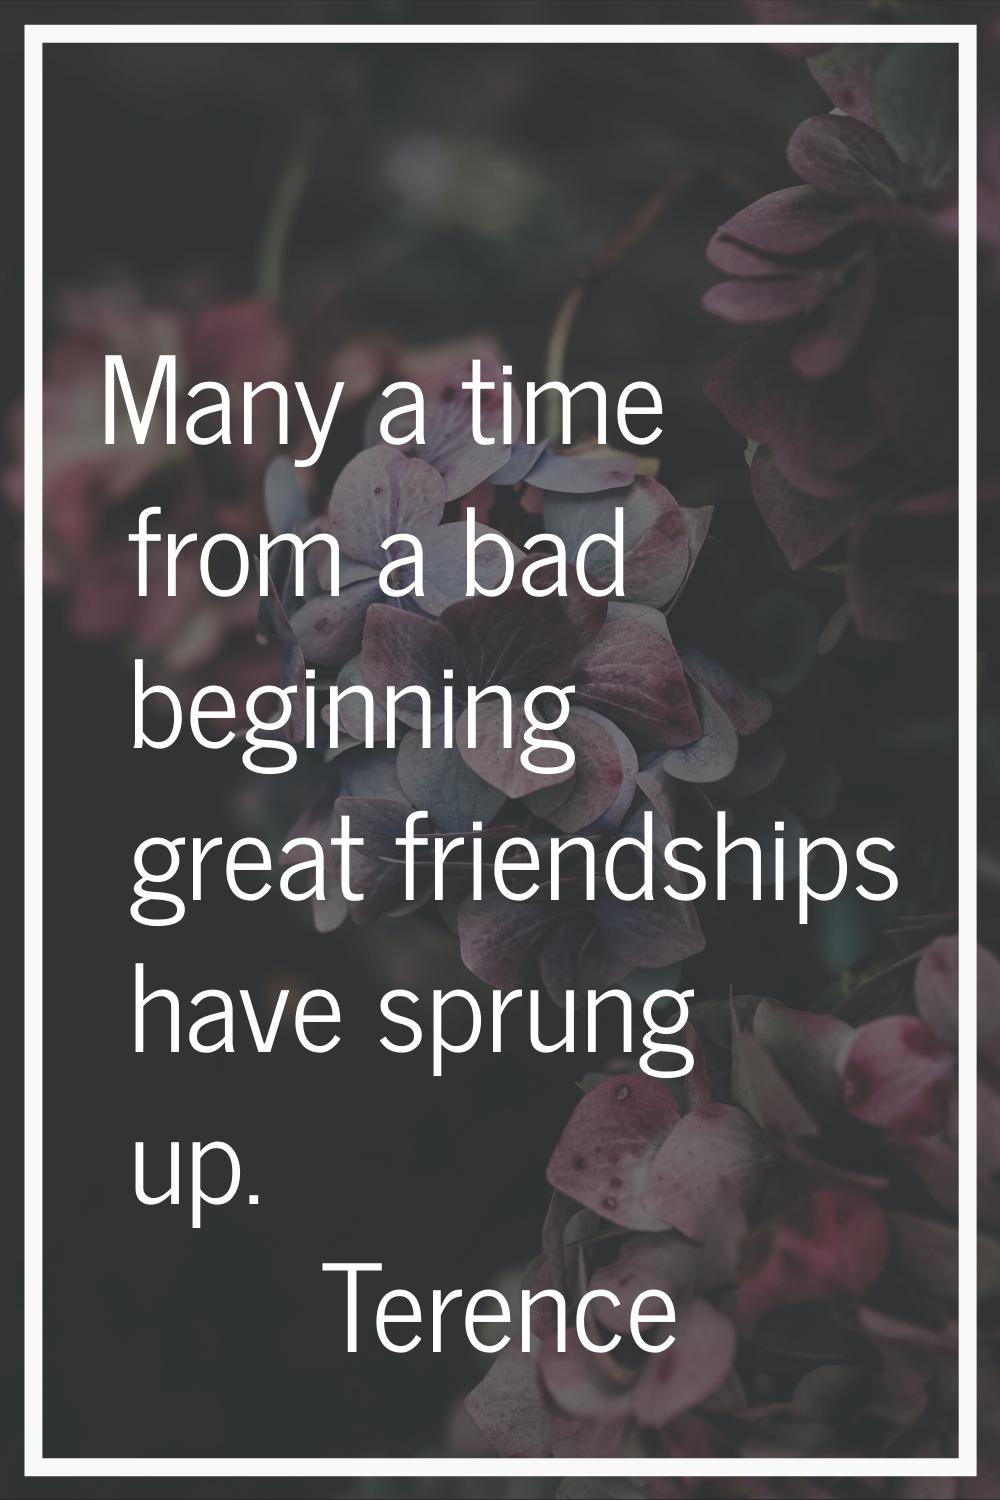 Many a time from a bad beginning great friendships have sprung up.